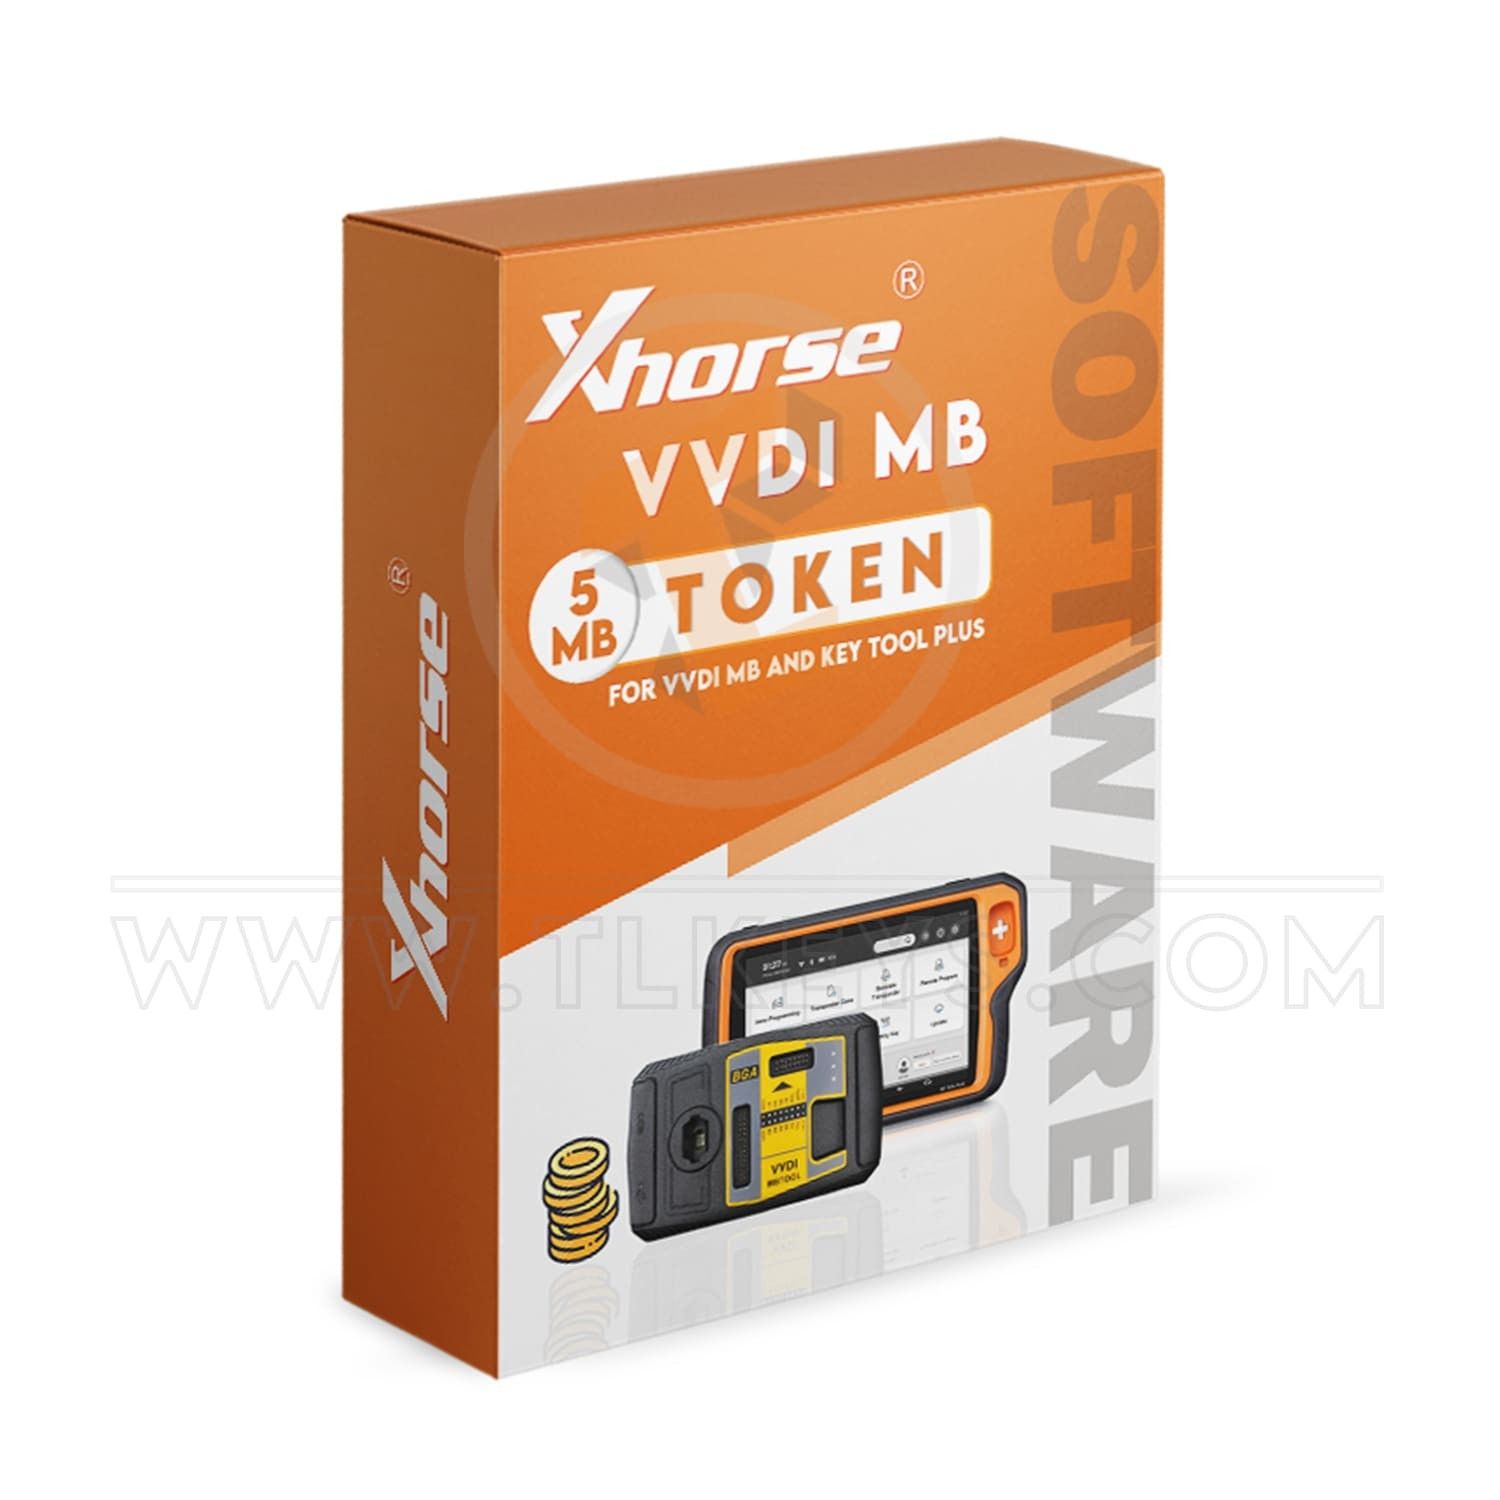 Xhorse 5 MB Token For VVDI MB And Key Tool Plus Compatible devices VVDI Key Tool Plus